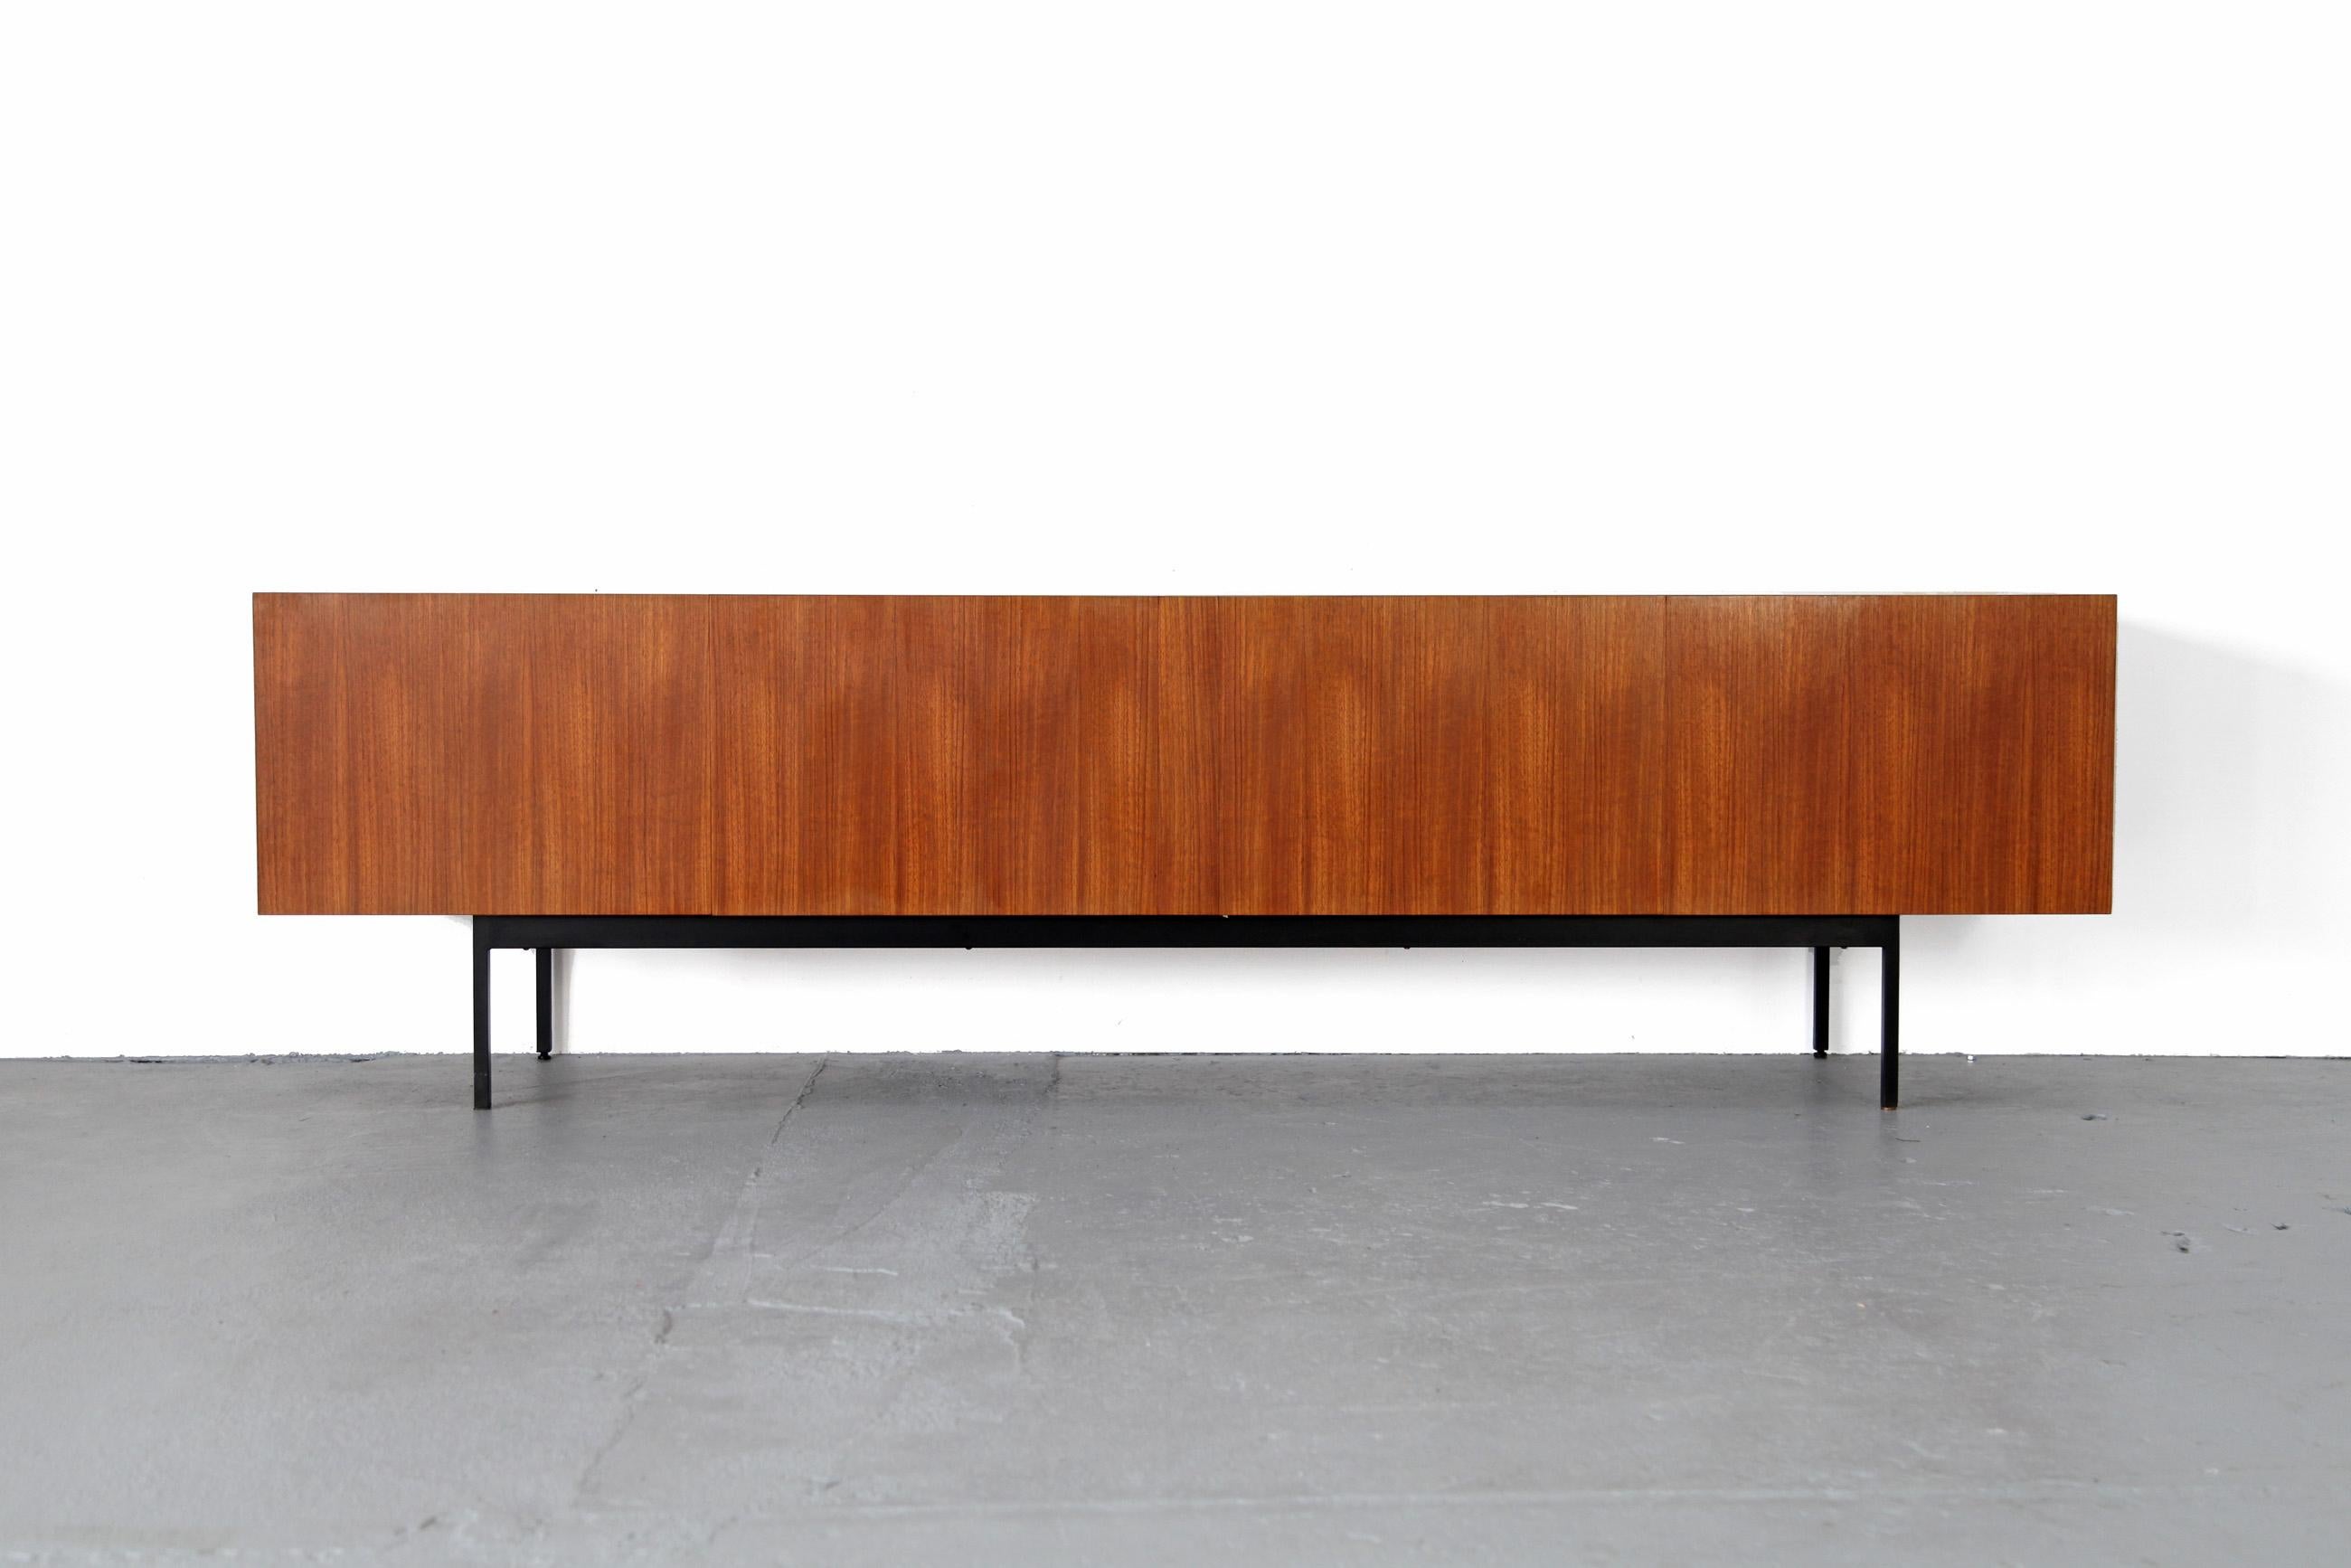 A classic piece of furniture from the late 1950s designed by Dieter Waeckerlin. The sideboard is veneered with teakwood on the outside and maple wood on the inside.